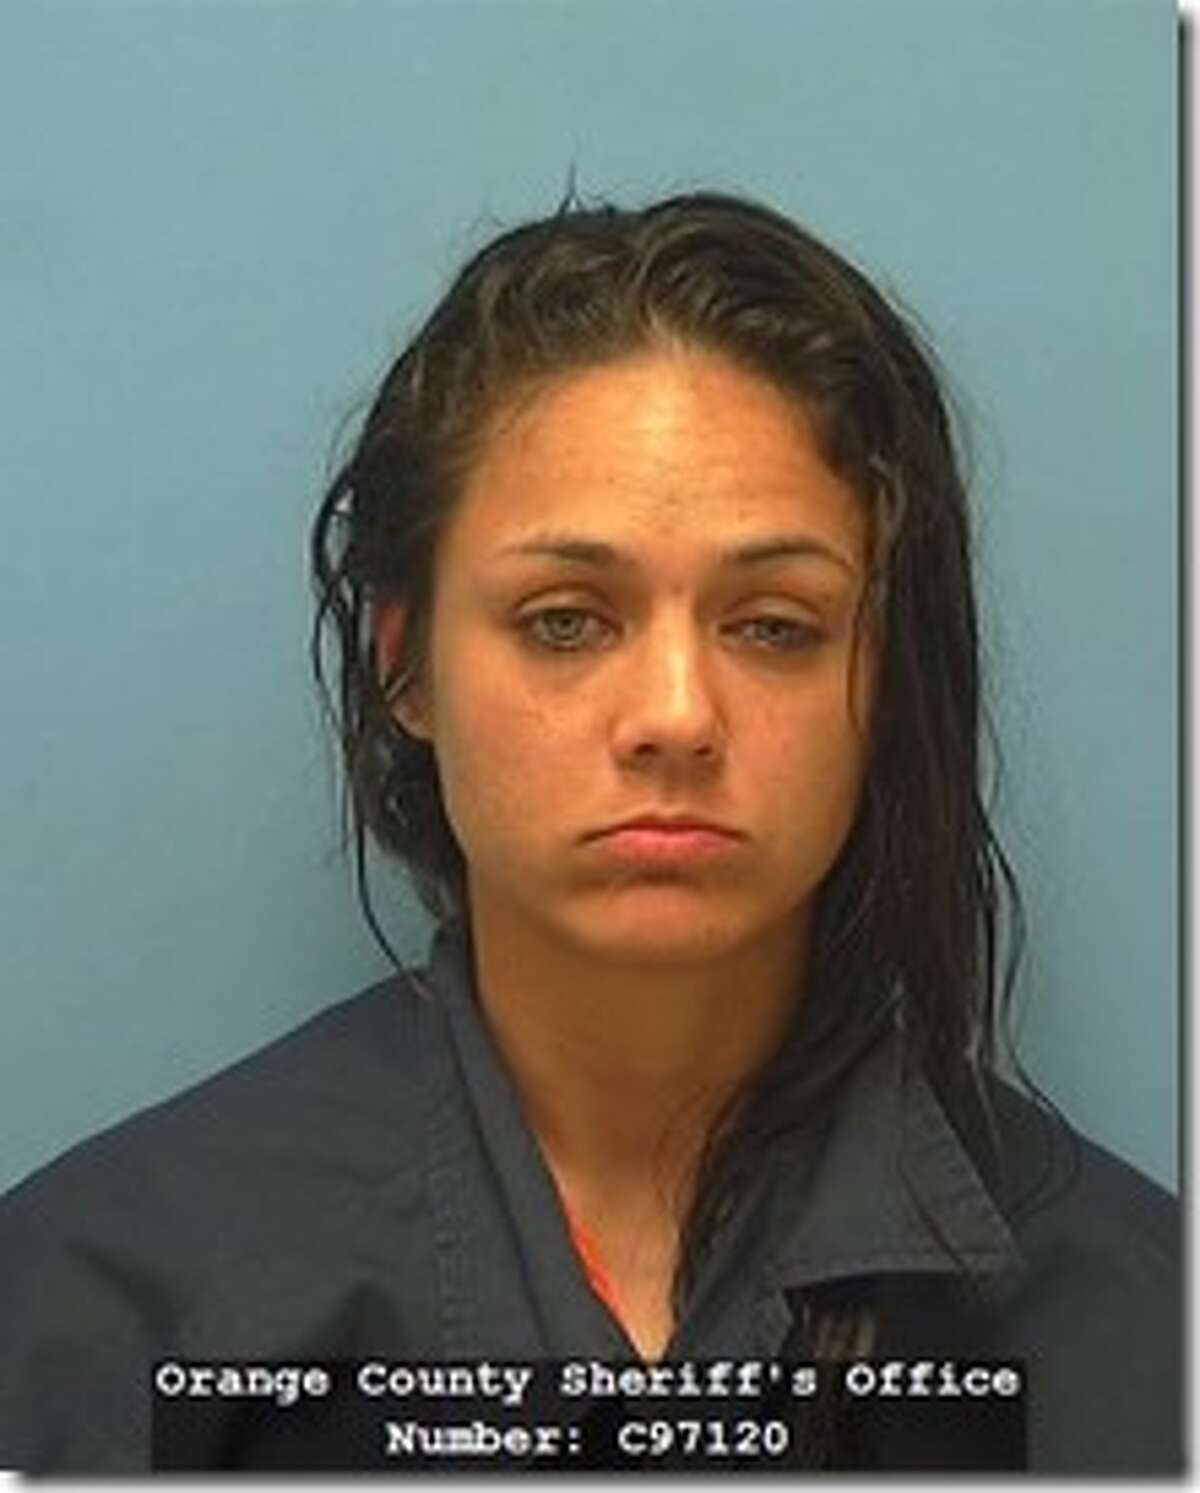 Regena Ranee Boyett, 33, was arrested by Pinehurst police at about 12:30 a.m. Monday. She was allegedly in possession of methamphetamine, the department said.